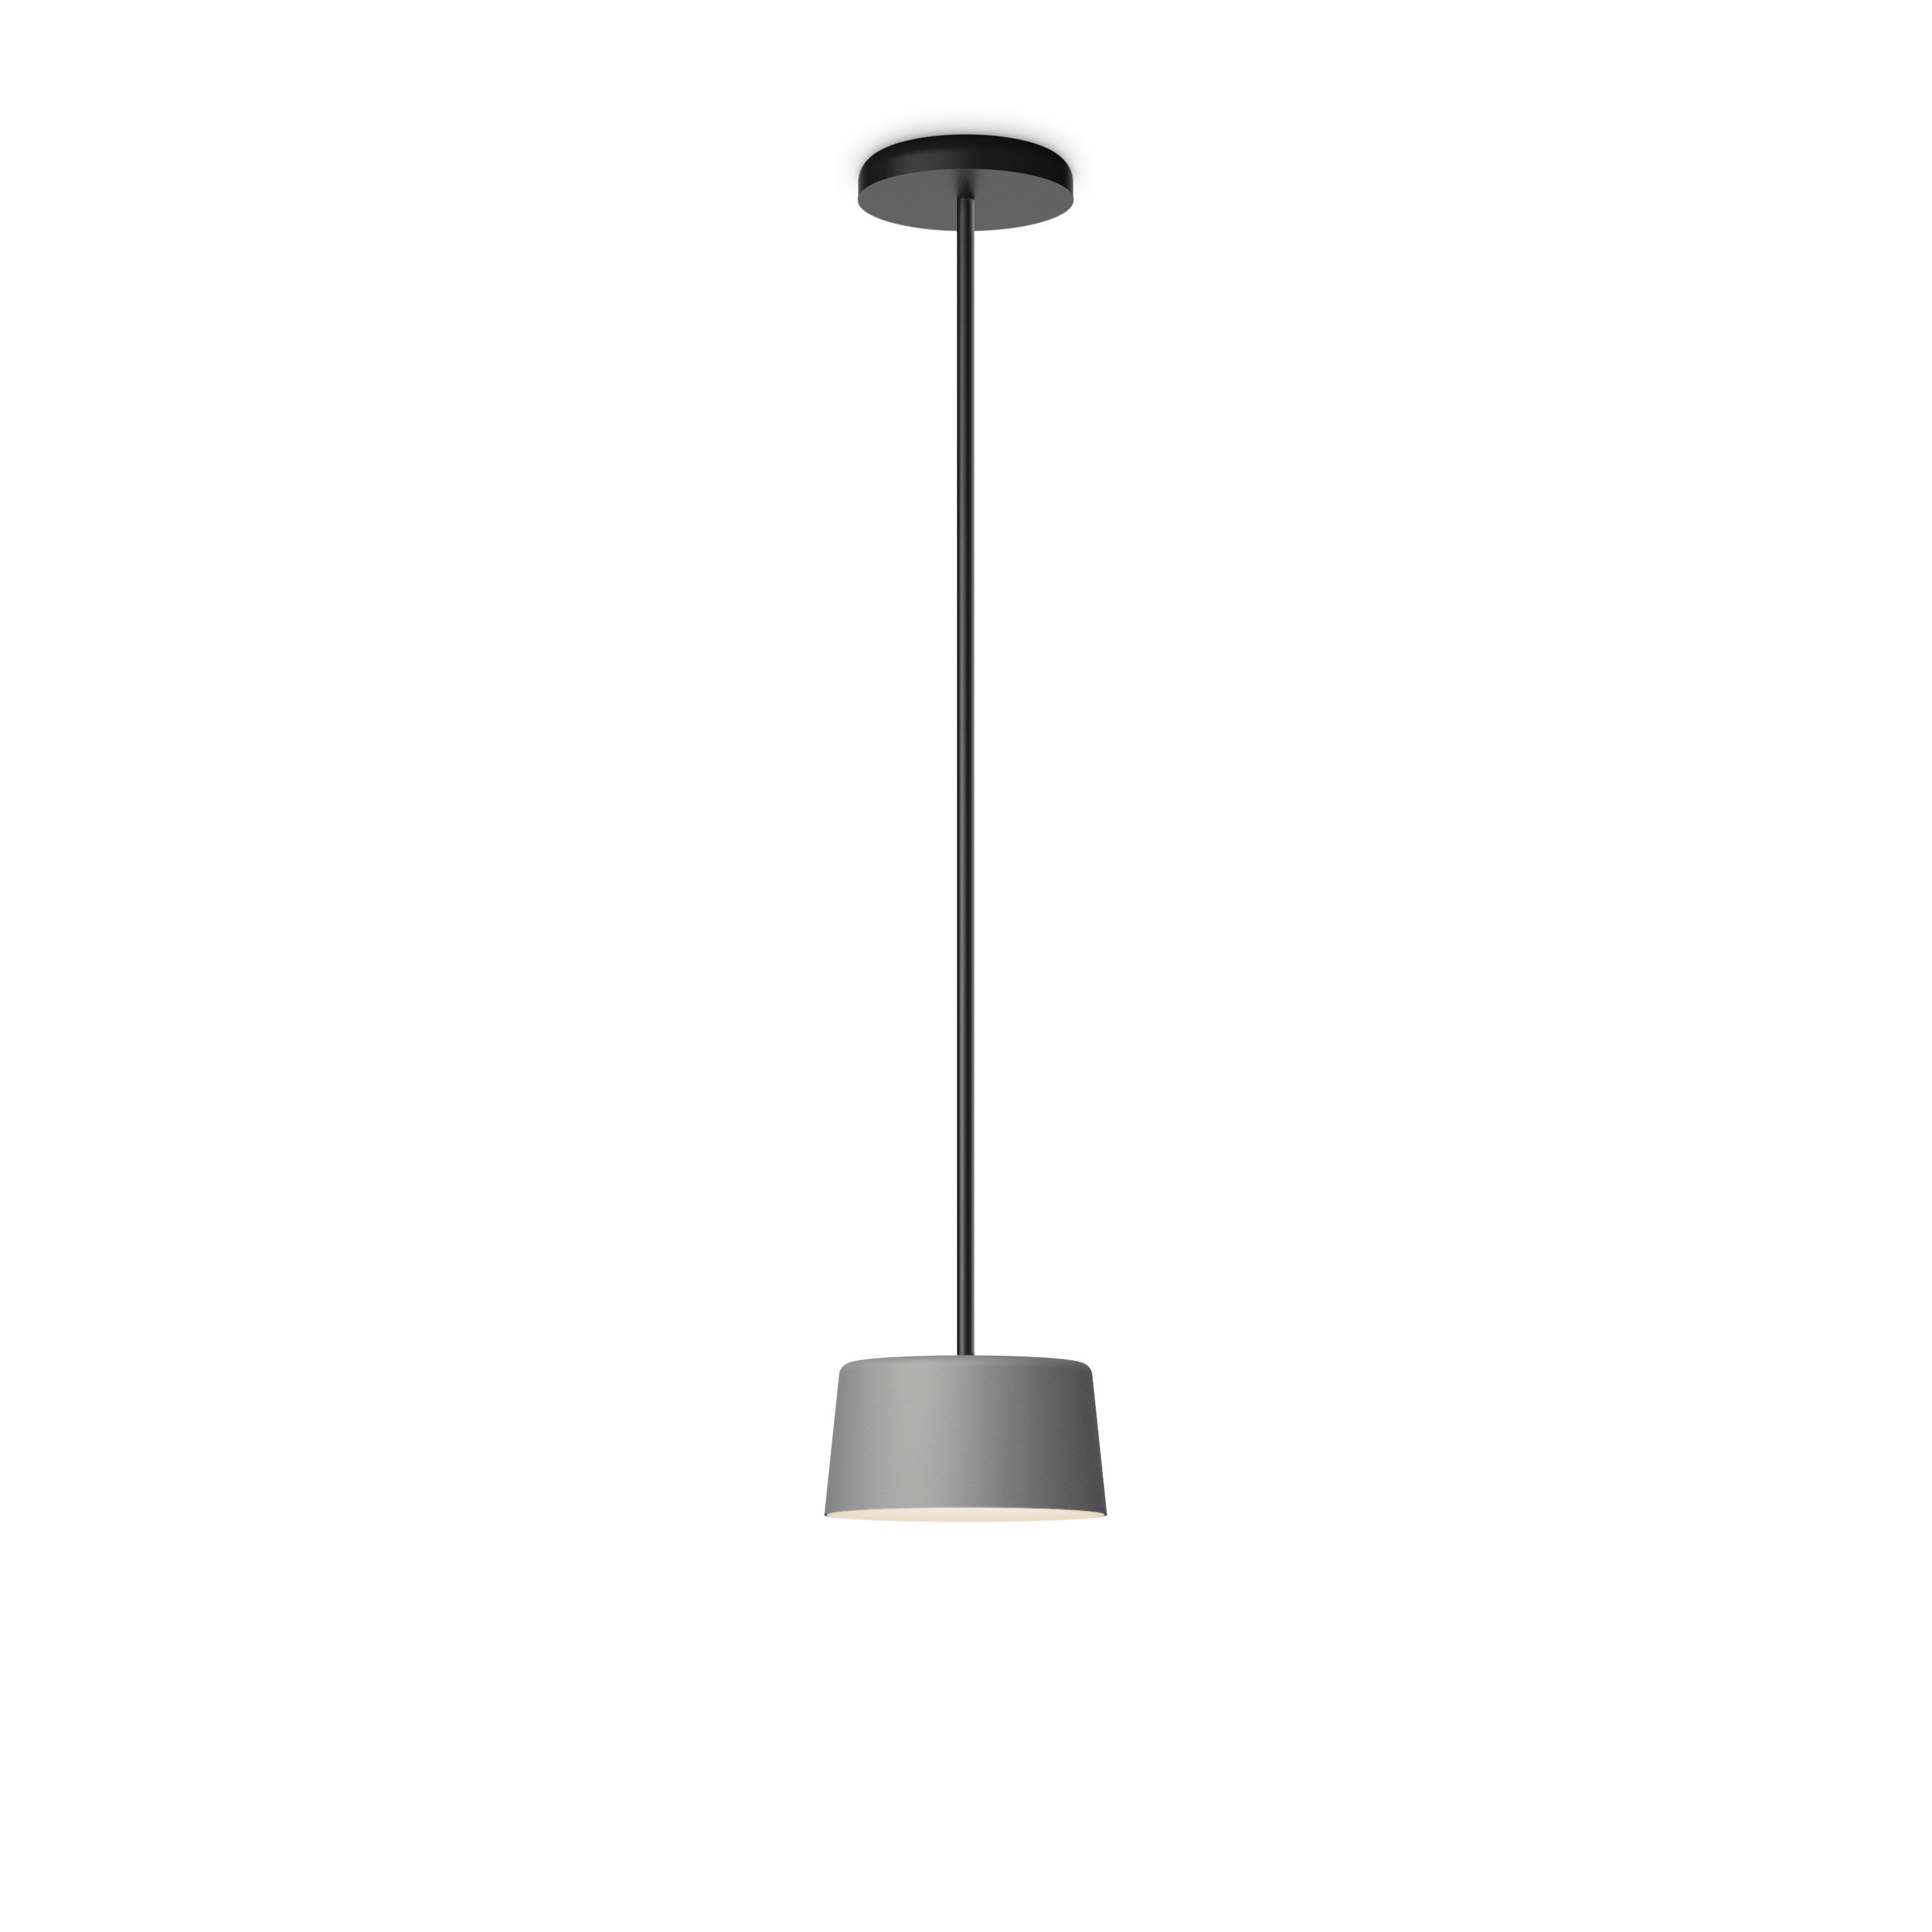 Hanging lamp Tube by Vibia